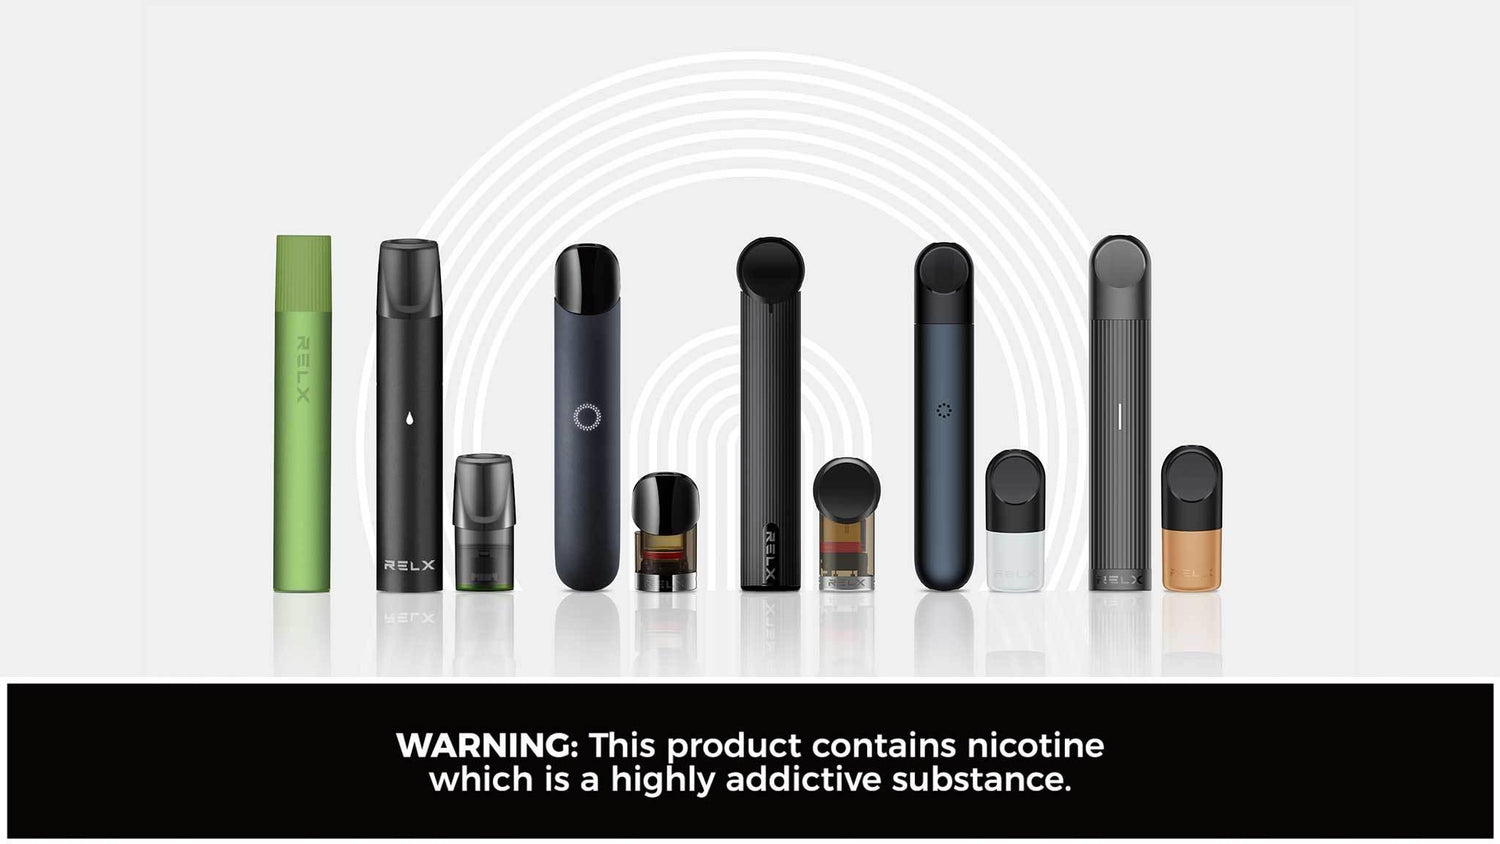 A Guide to Your First RELX E-Cigarette - RELX UK